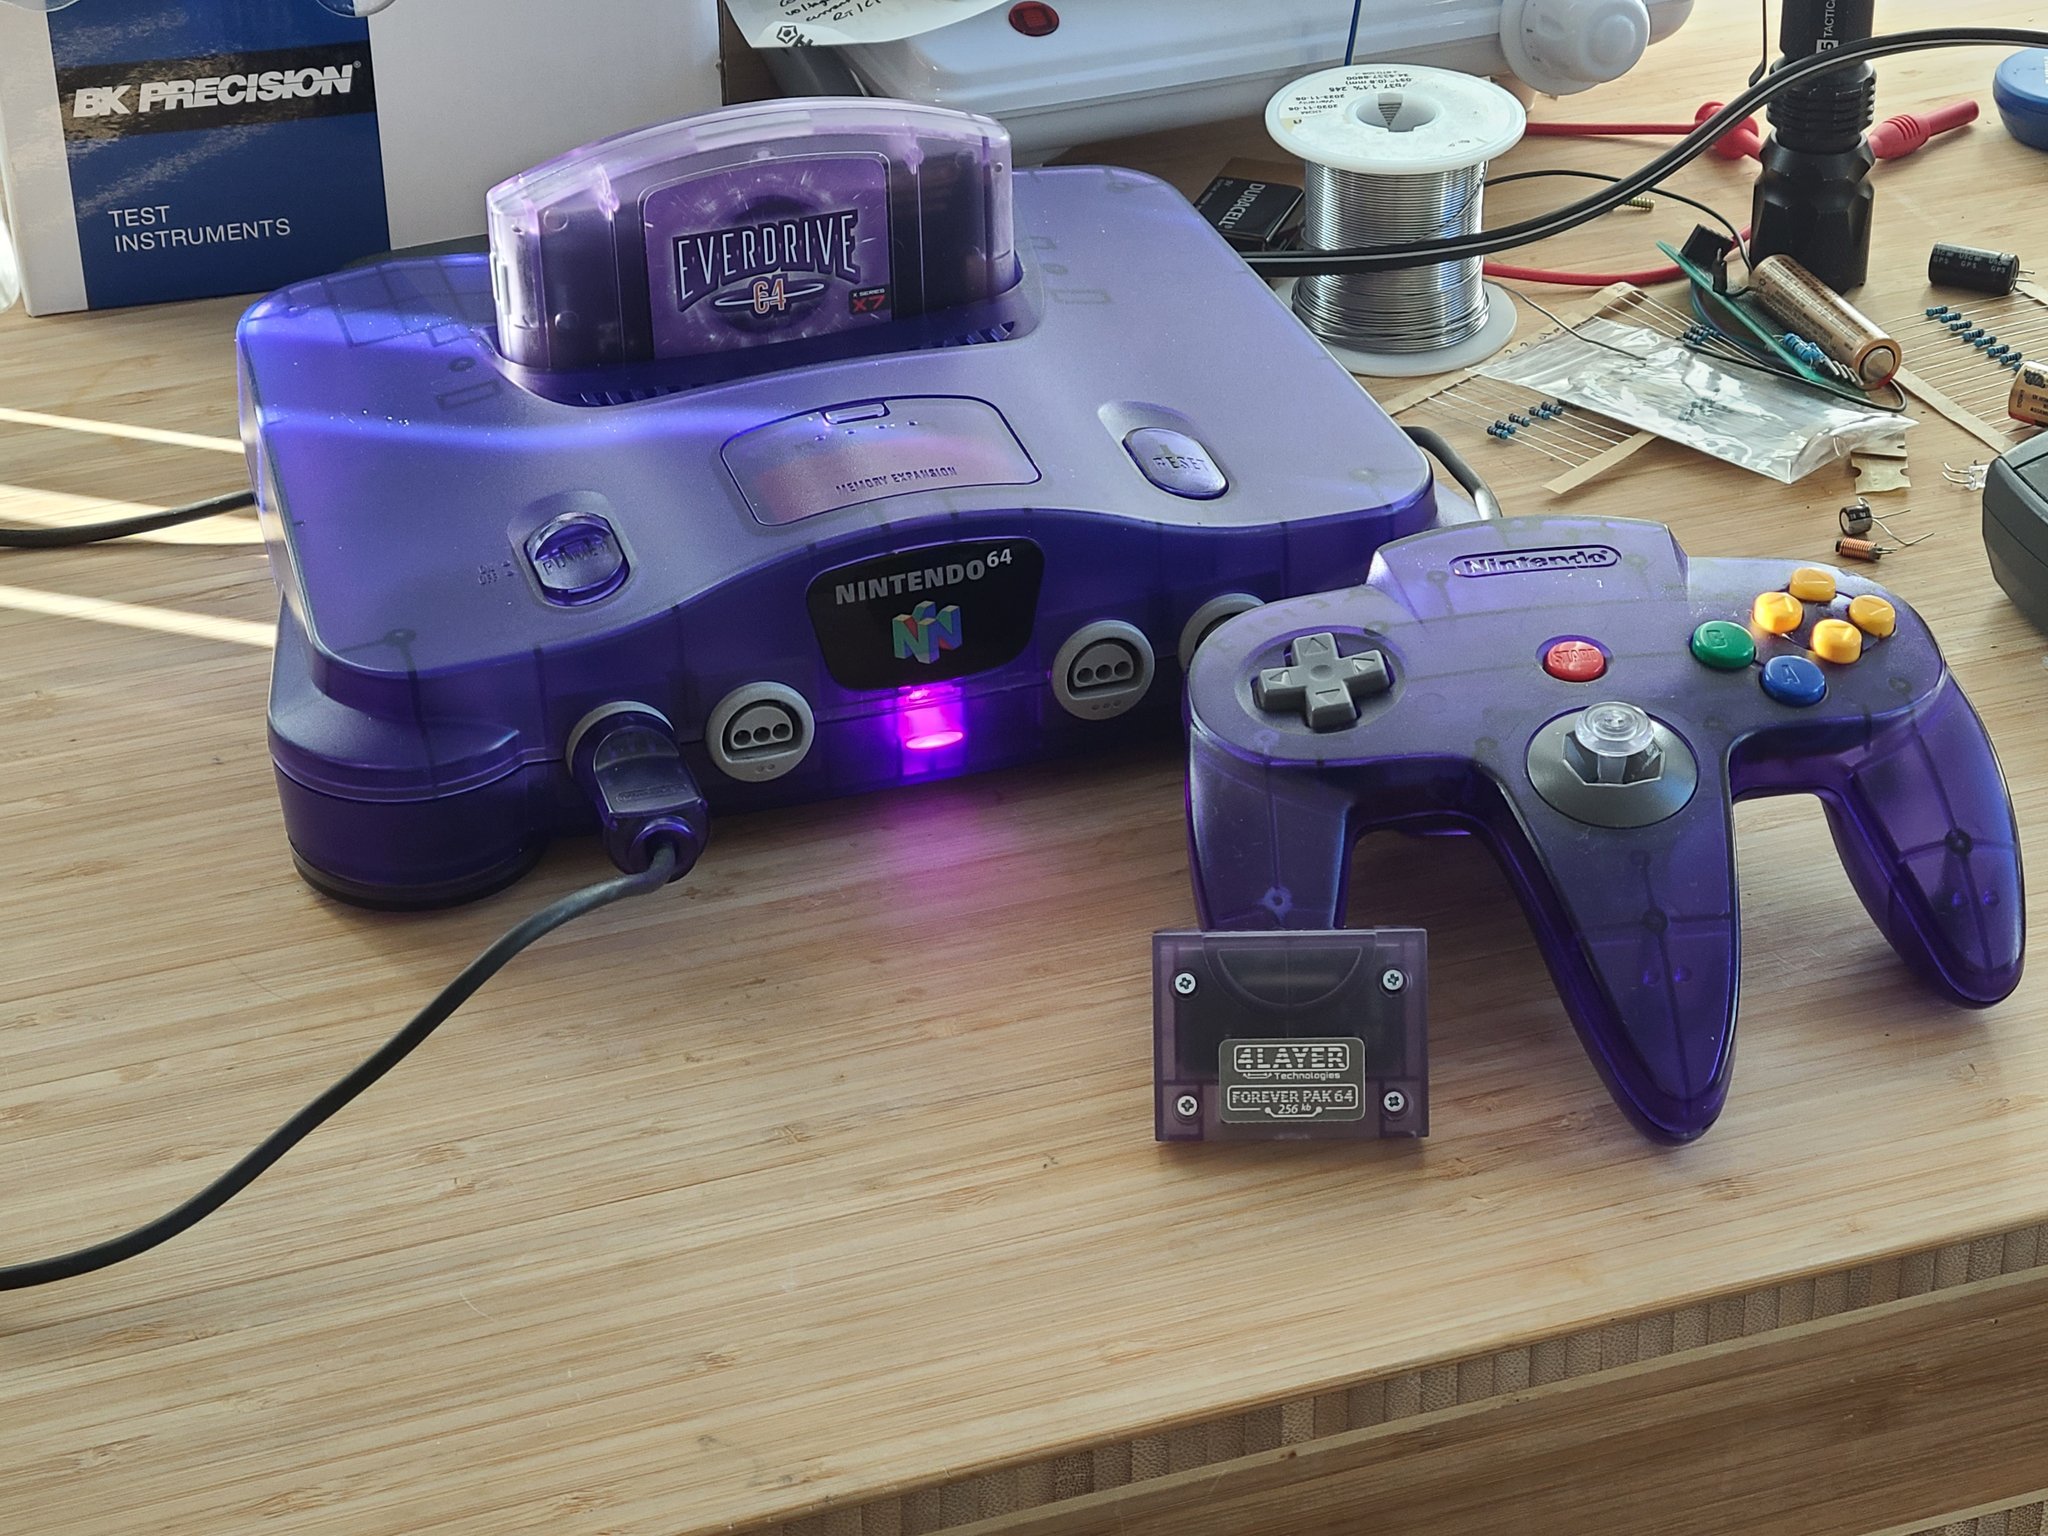 King 📺 on Twitter: "Finally finished my N64 setup. Midnight Blue shell + controller from Japan, color matched region-free cart slot from @collingall, kitsch-bent analog stick, matching atomic purple accessories